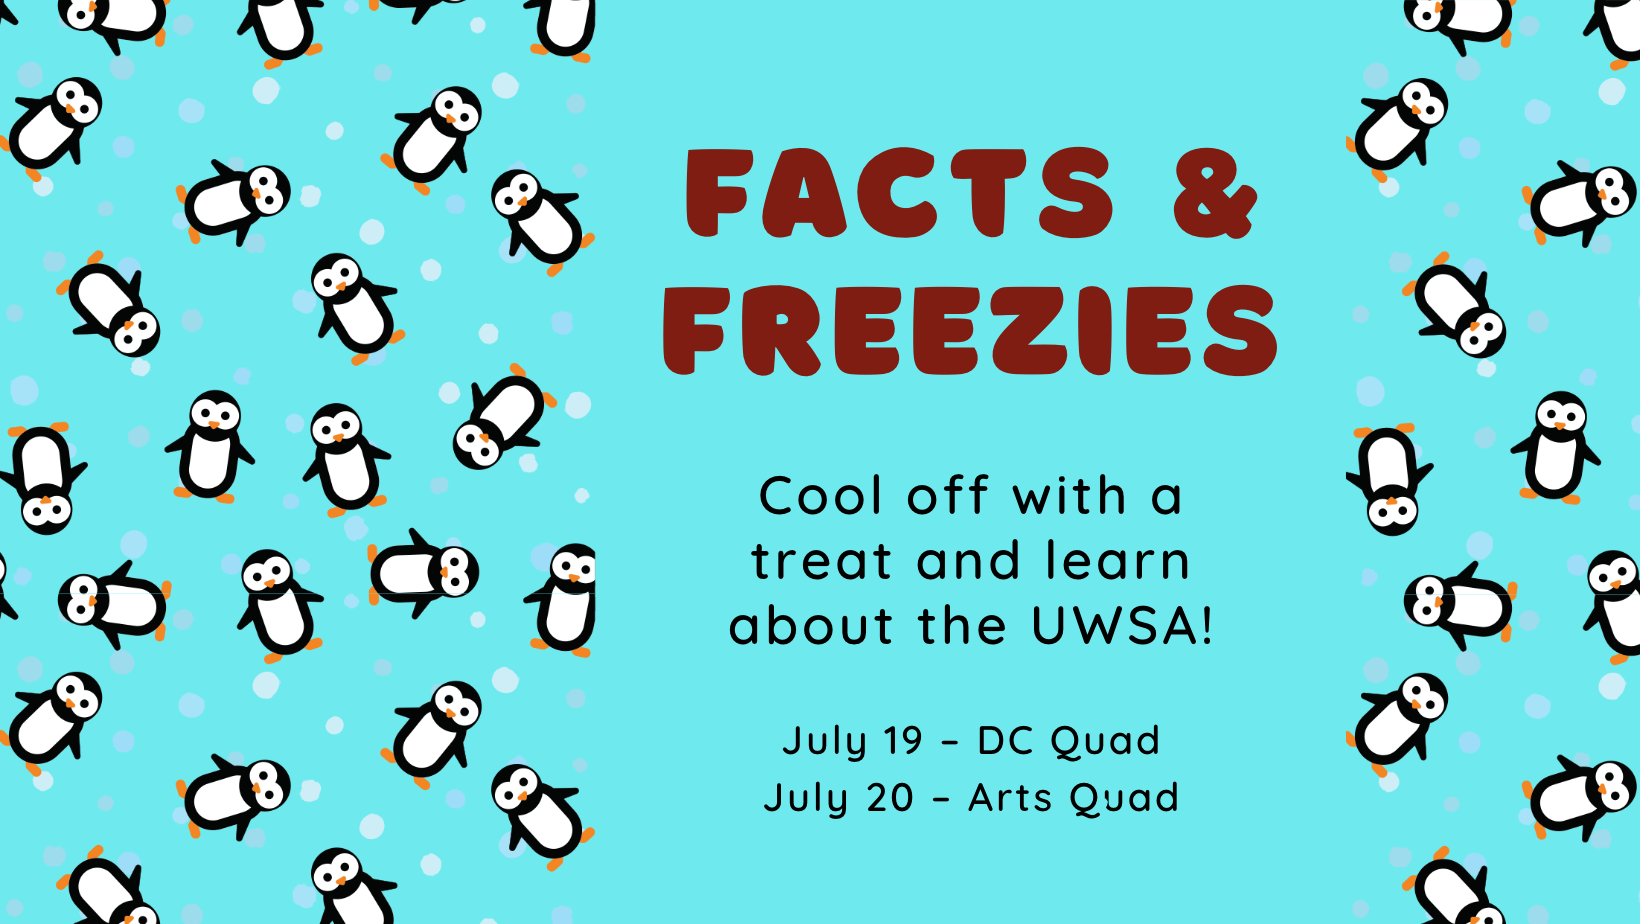 Cool off with a treat and learn about the UWSA! The background is a pattern of penguins and dots.